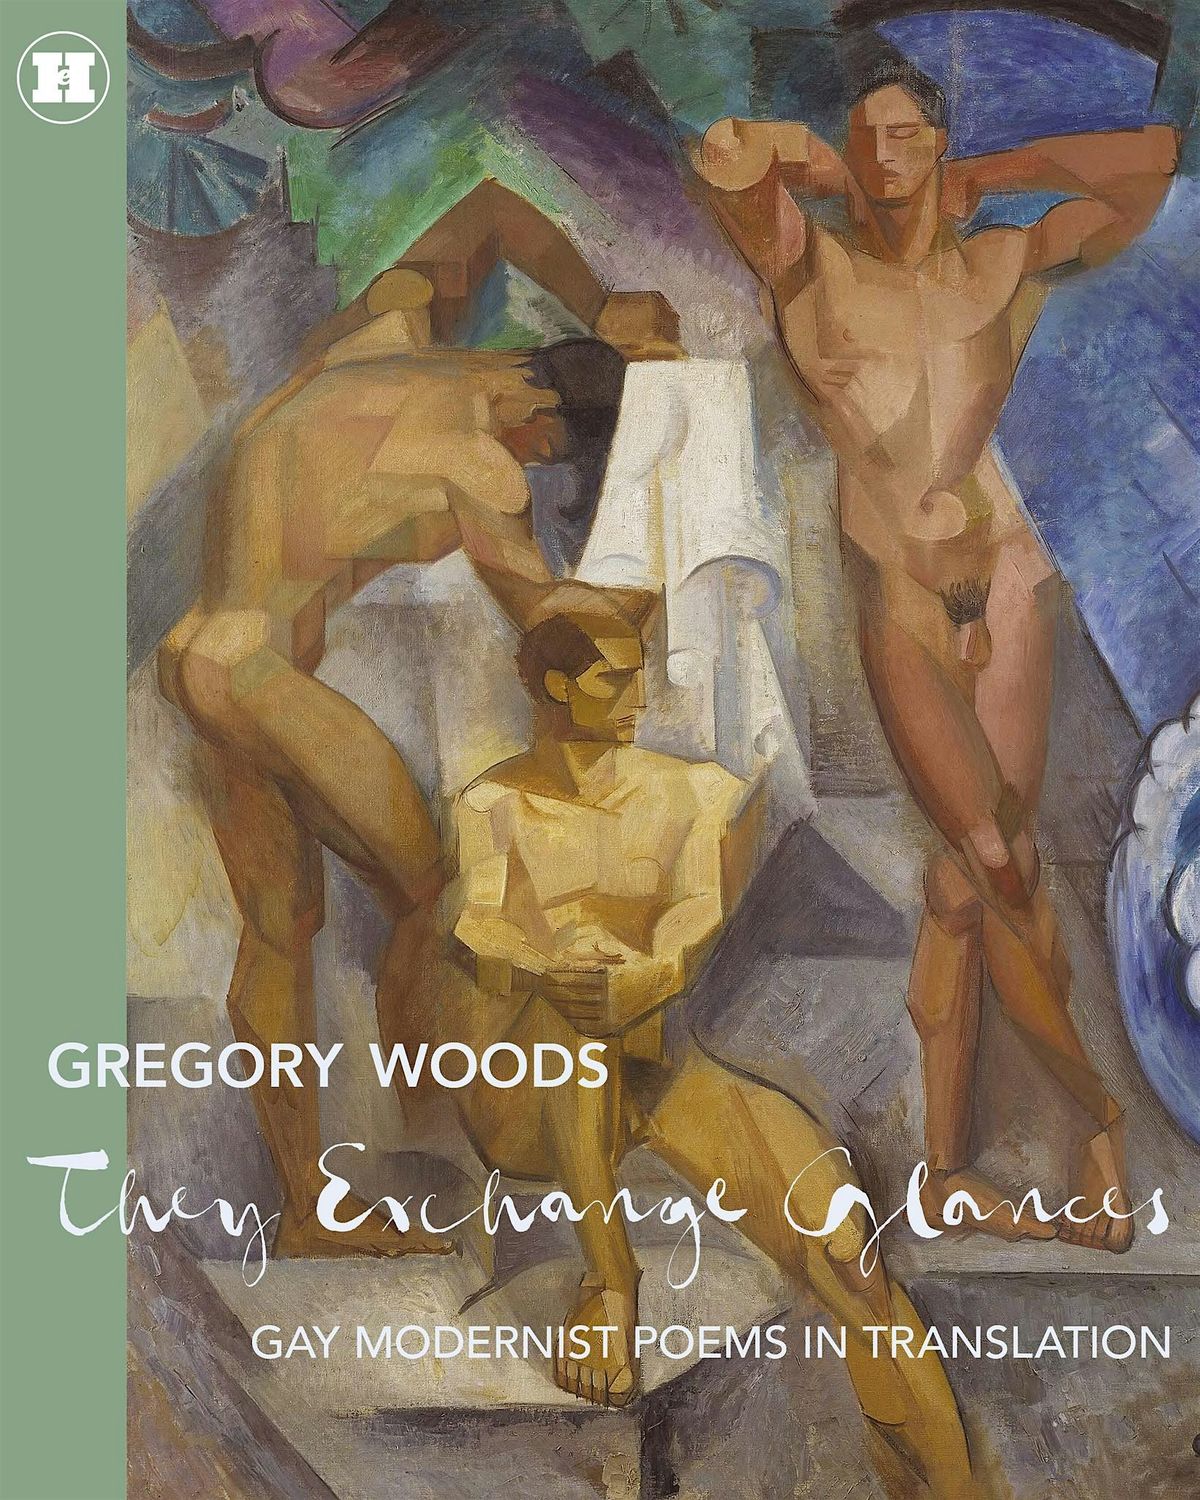 Celebrating Global Queer Poetry with Hongwei Bao and Gregory Woods